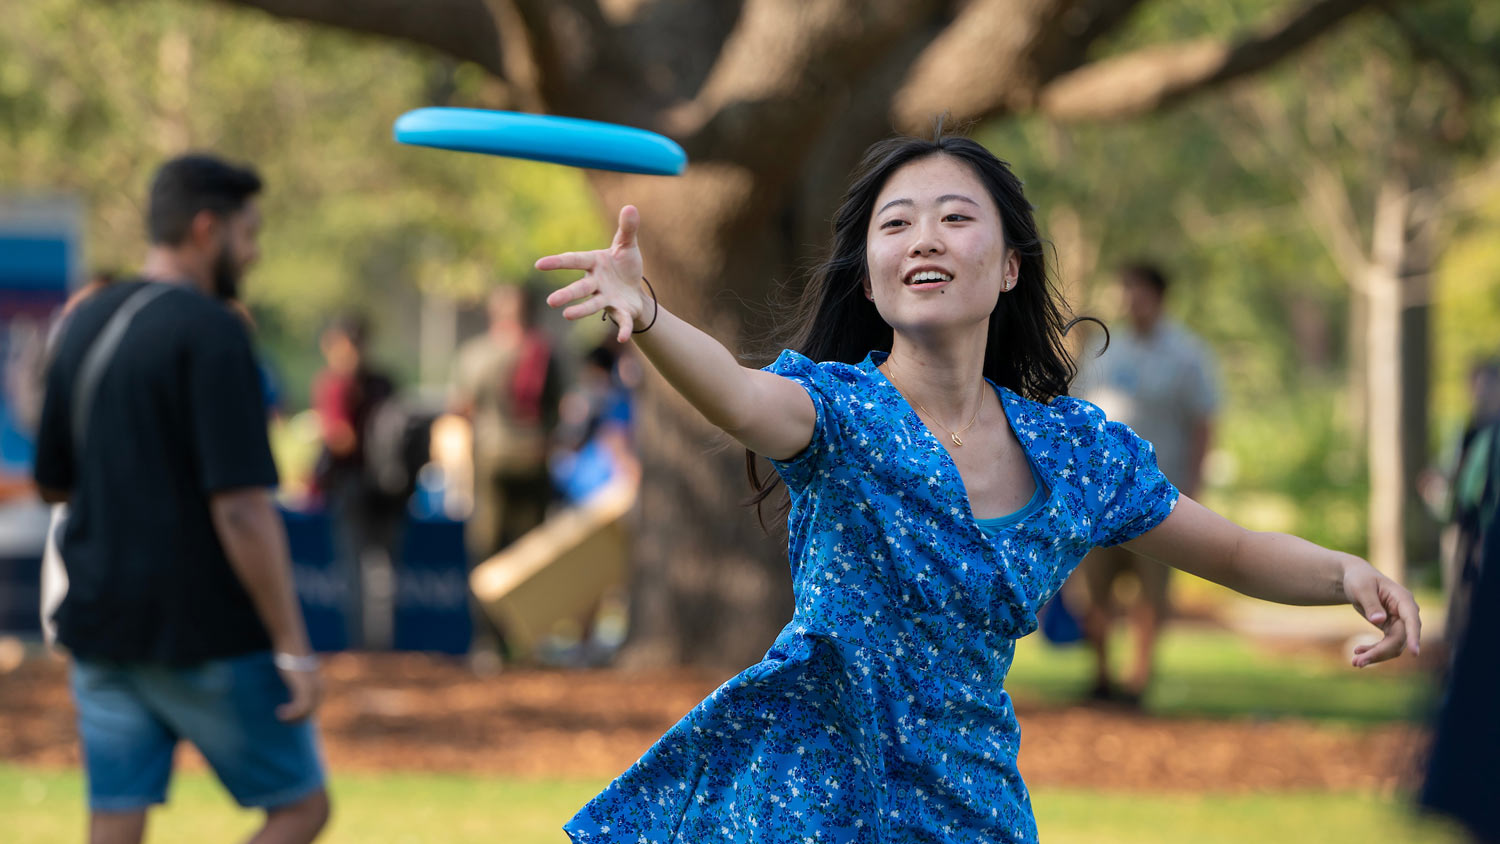 A student tosses a frisbee while at an event in 91Ƶ Park